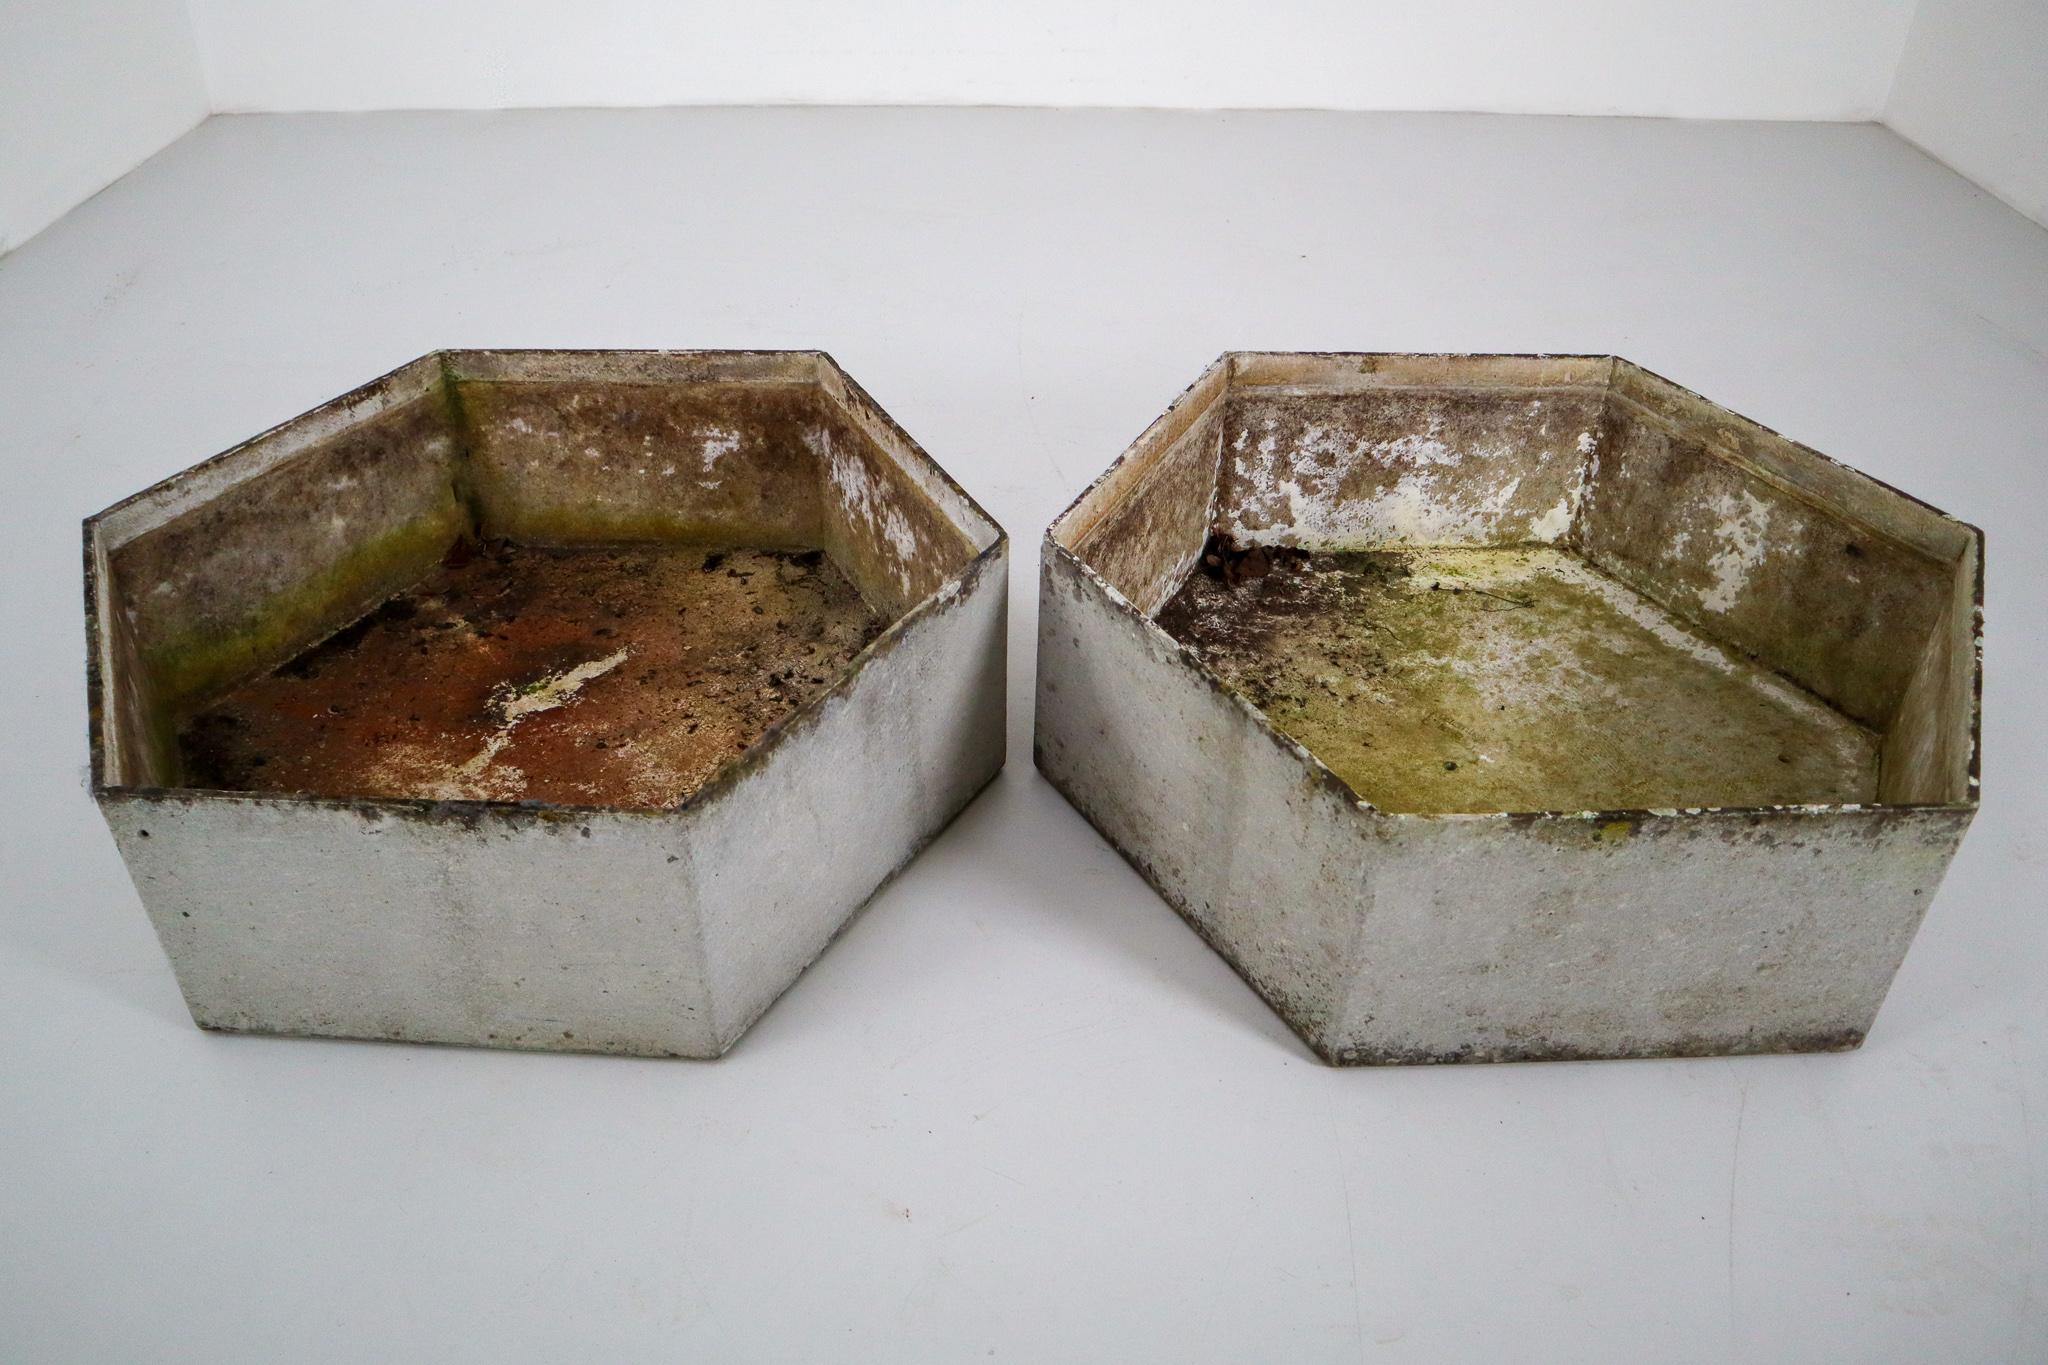 A set of two Mid-Century Modern large hexagon planters of composition stone for an indoor or outdoor garden, garden room, or terrace, designed by the iconic Willy Guhl in the early 1960s. They have a lovely naturally-weathered surface.